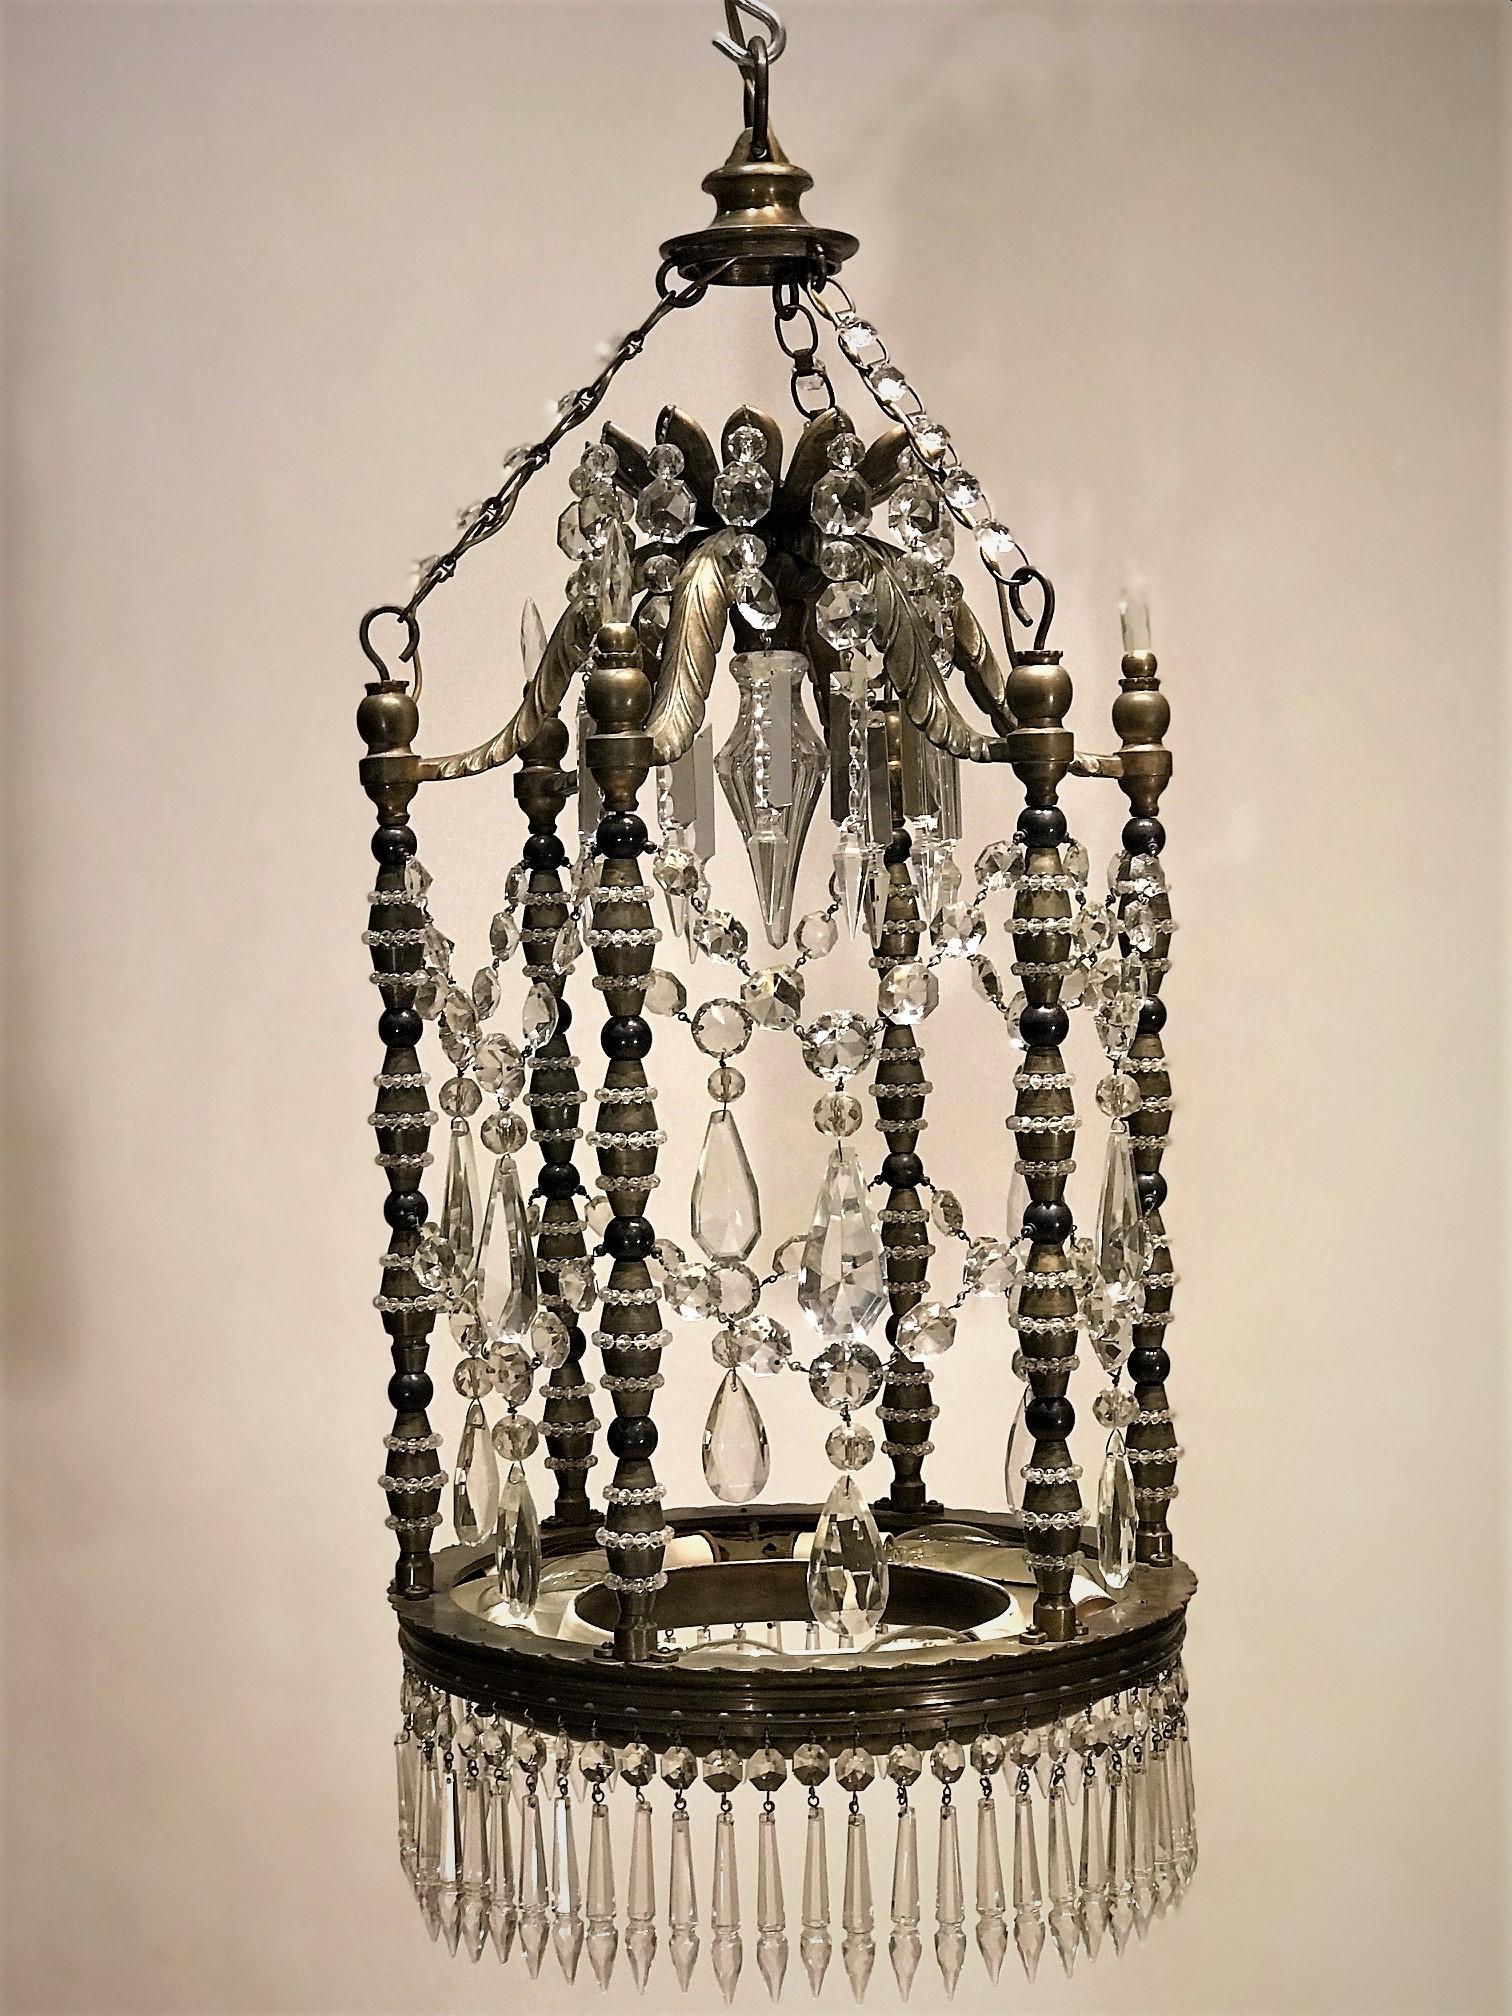 This unique lantern was probably hand made in Turkey prior to World War 1. The fixture is constructed of hand-cast brass with hand-cut lead crystal. The base has 6 indirect lights that can take up to 40 watt bulbs. The columns are stacked components